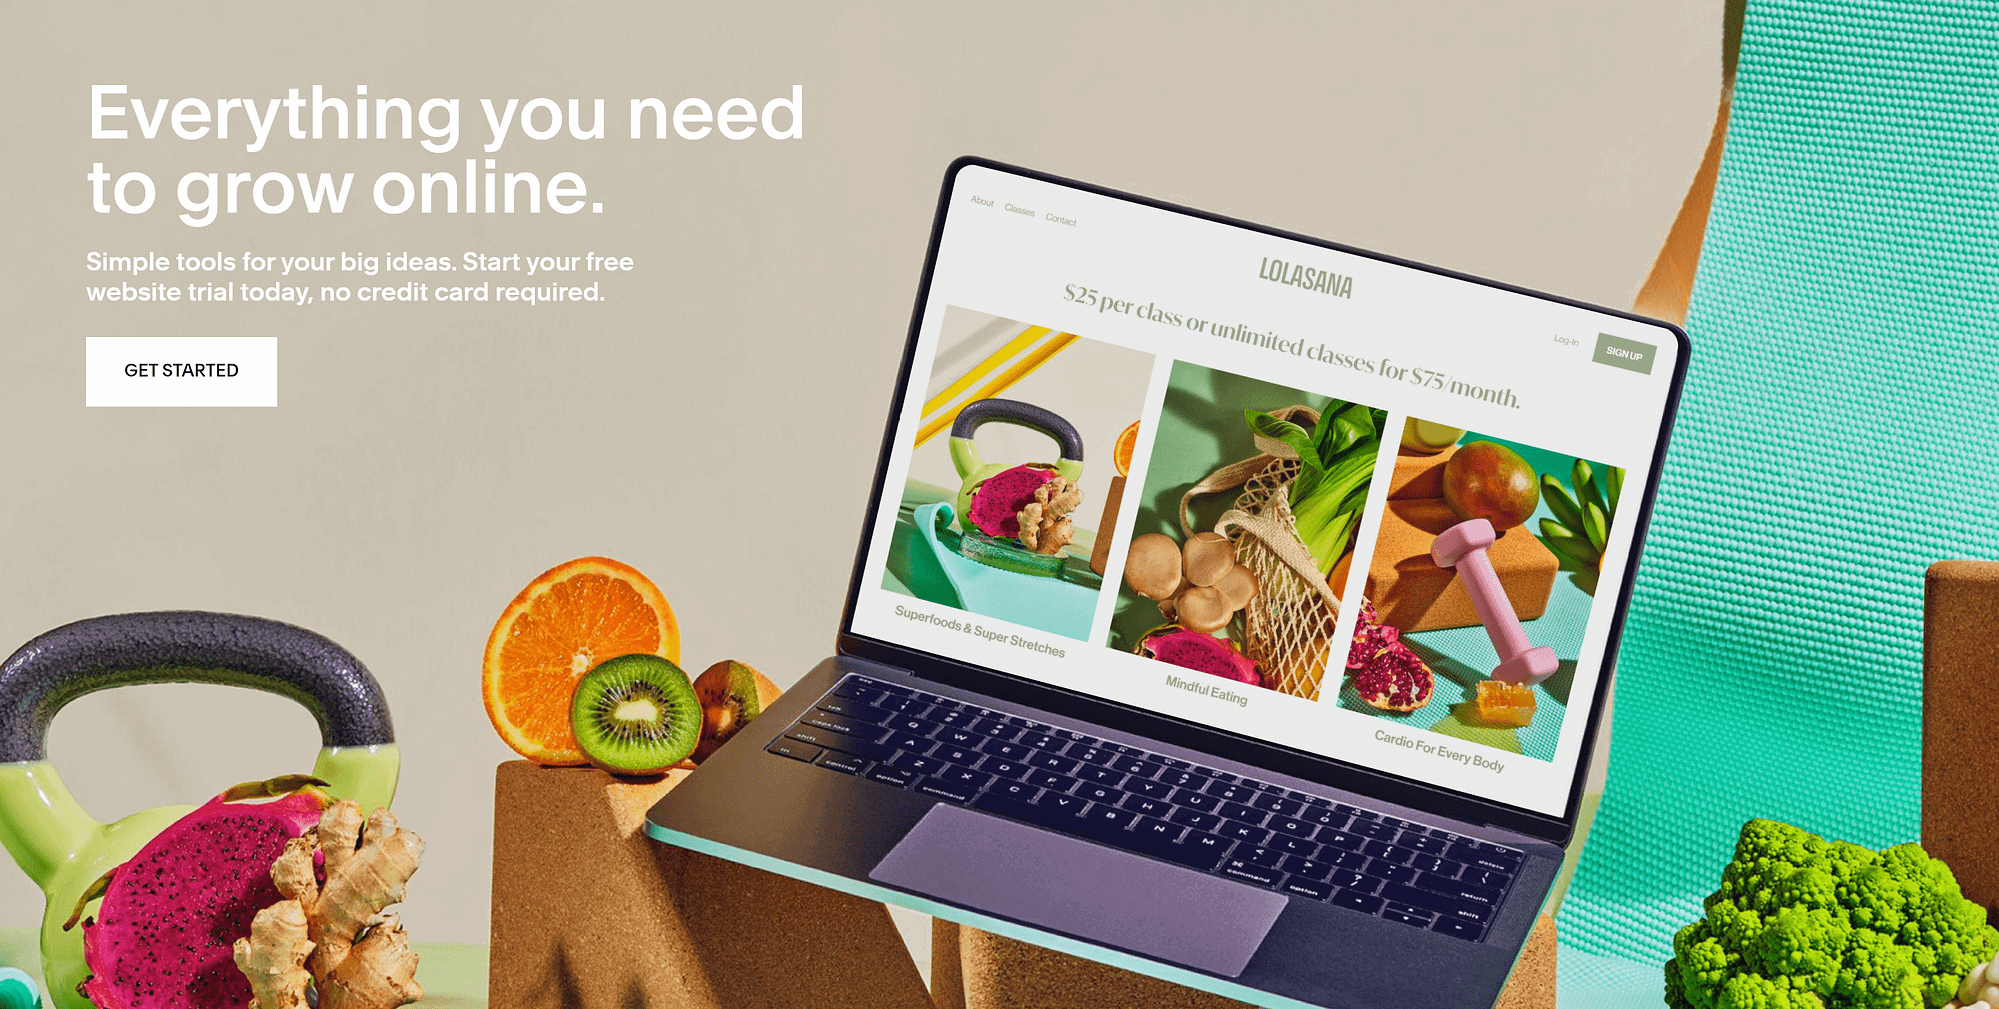 The colorful homepage for Squarespace.